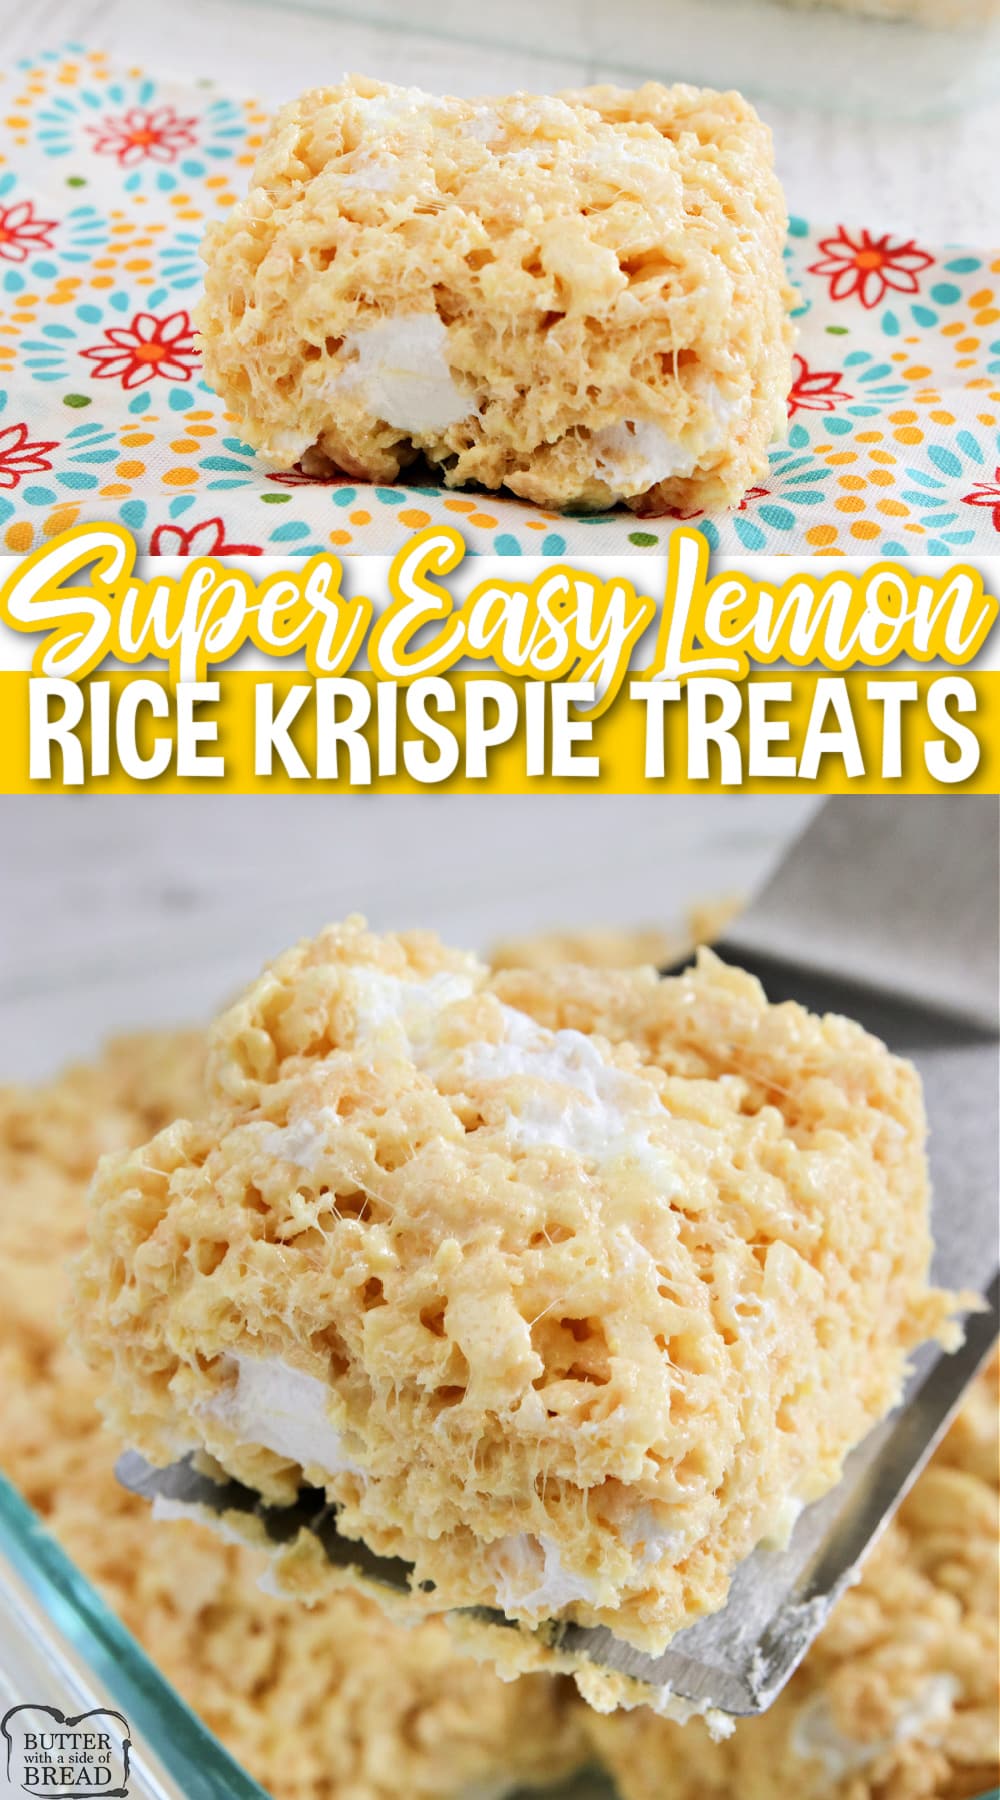 Lemon Rice Krispie Treats take classic rice krispie treats to another level by adding lemon pudding mix. Only 4 ingredients needed to make this delicious lemon dessert! 